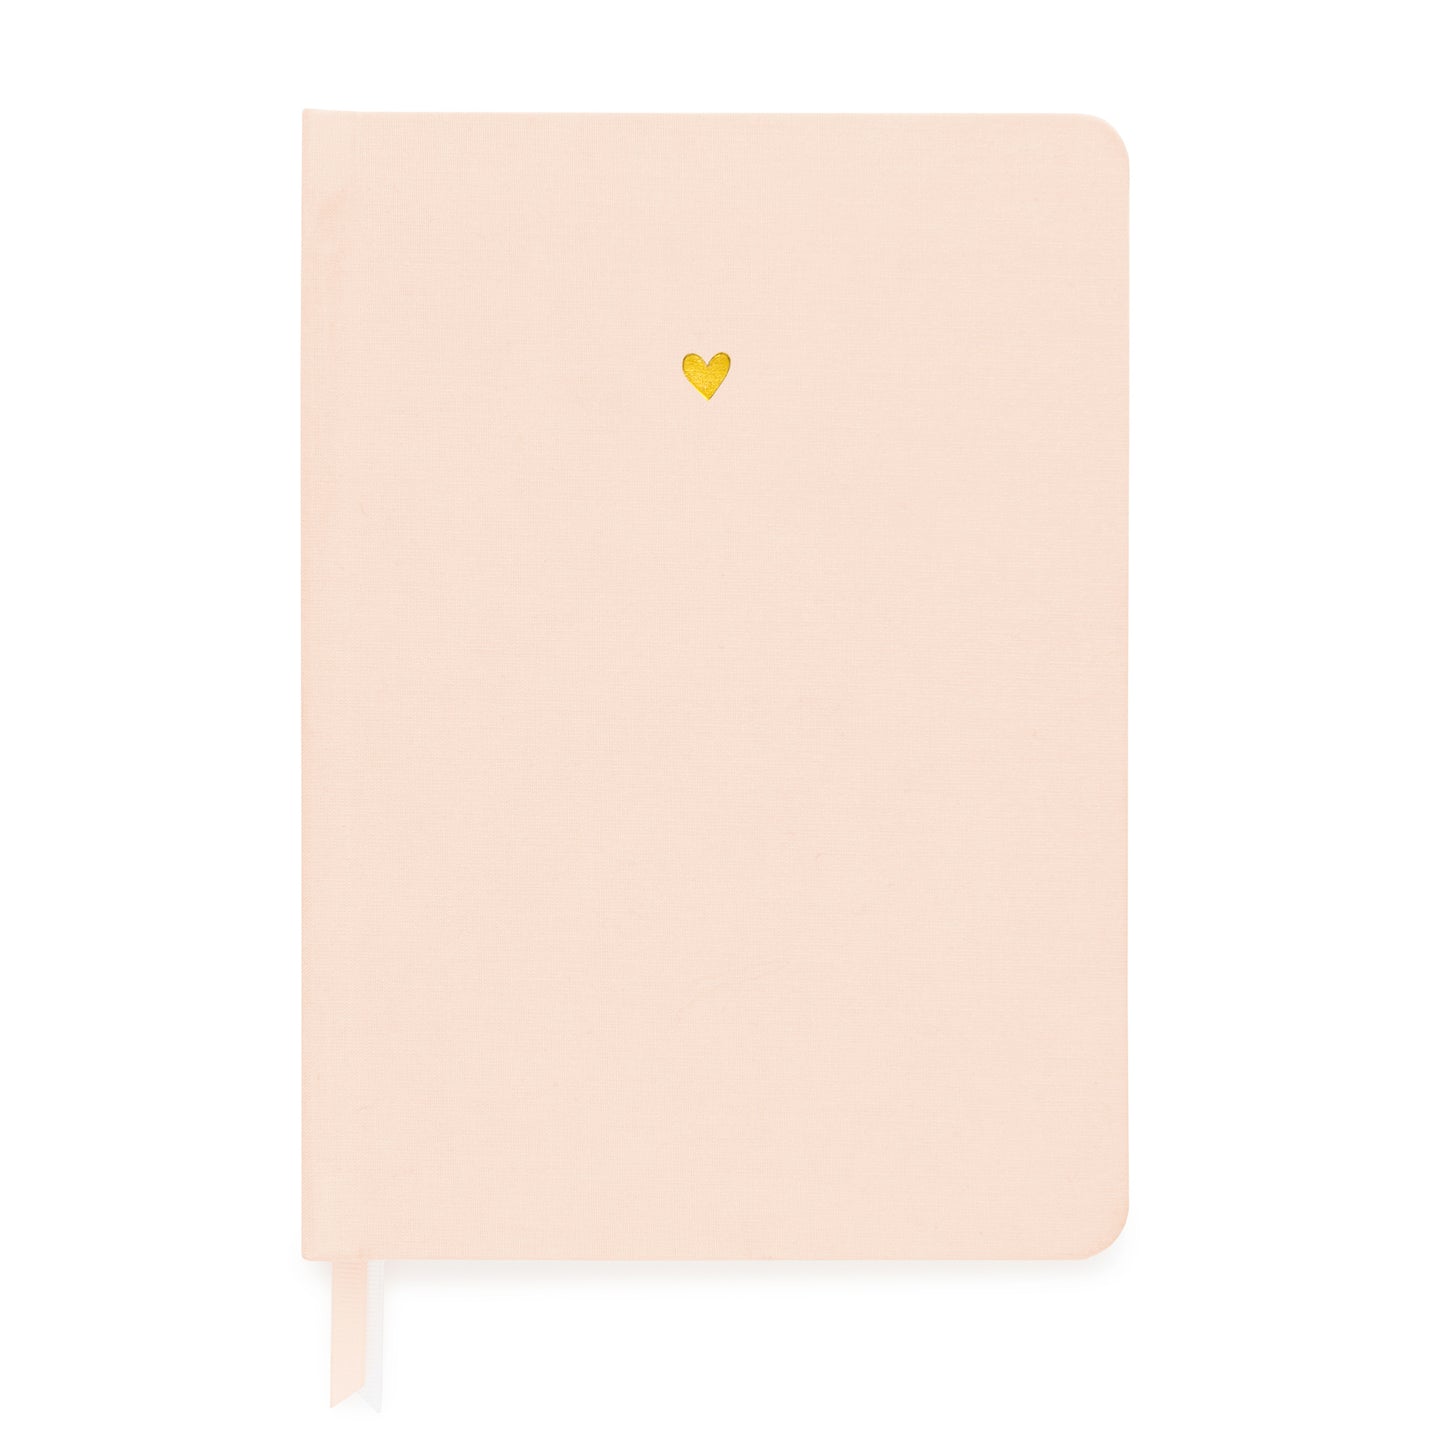 Pale pink journal with gold heart stamped